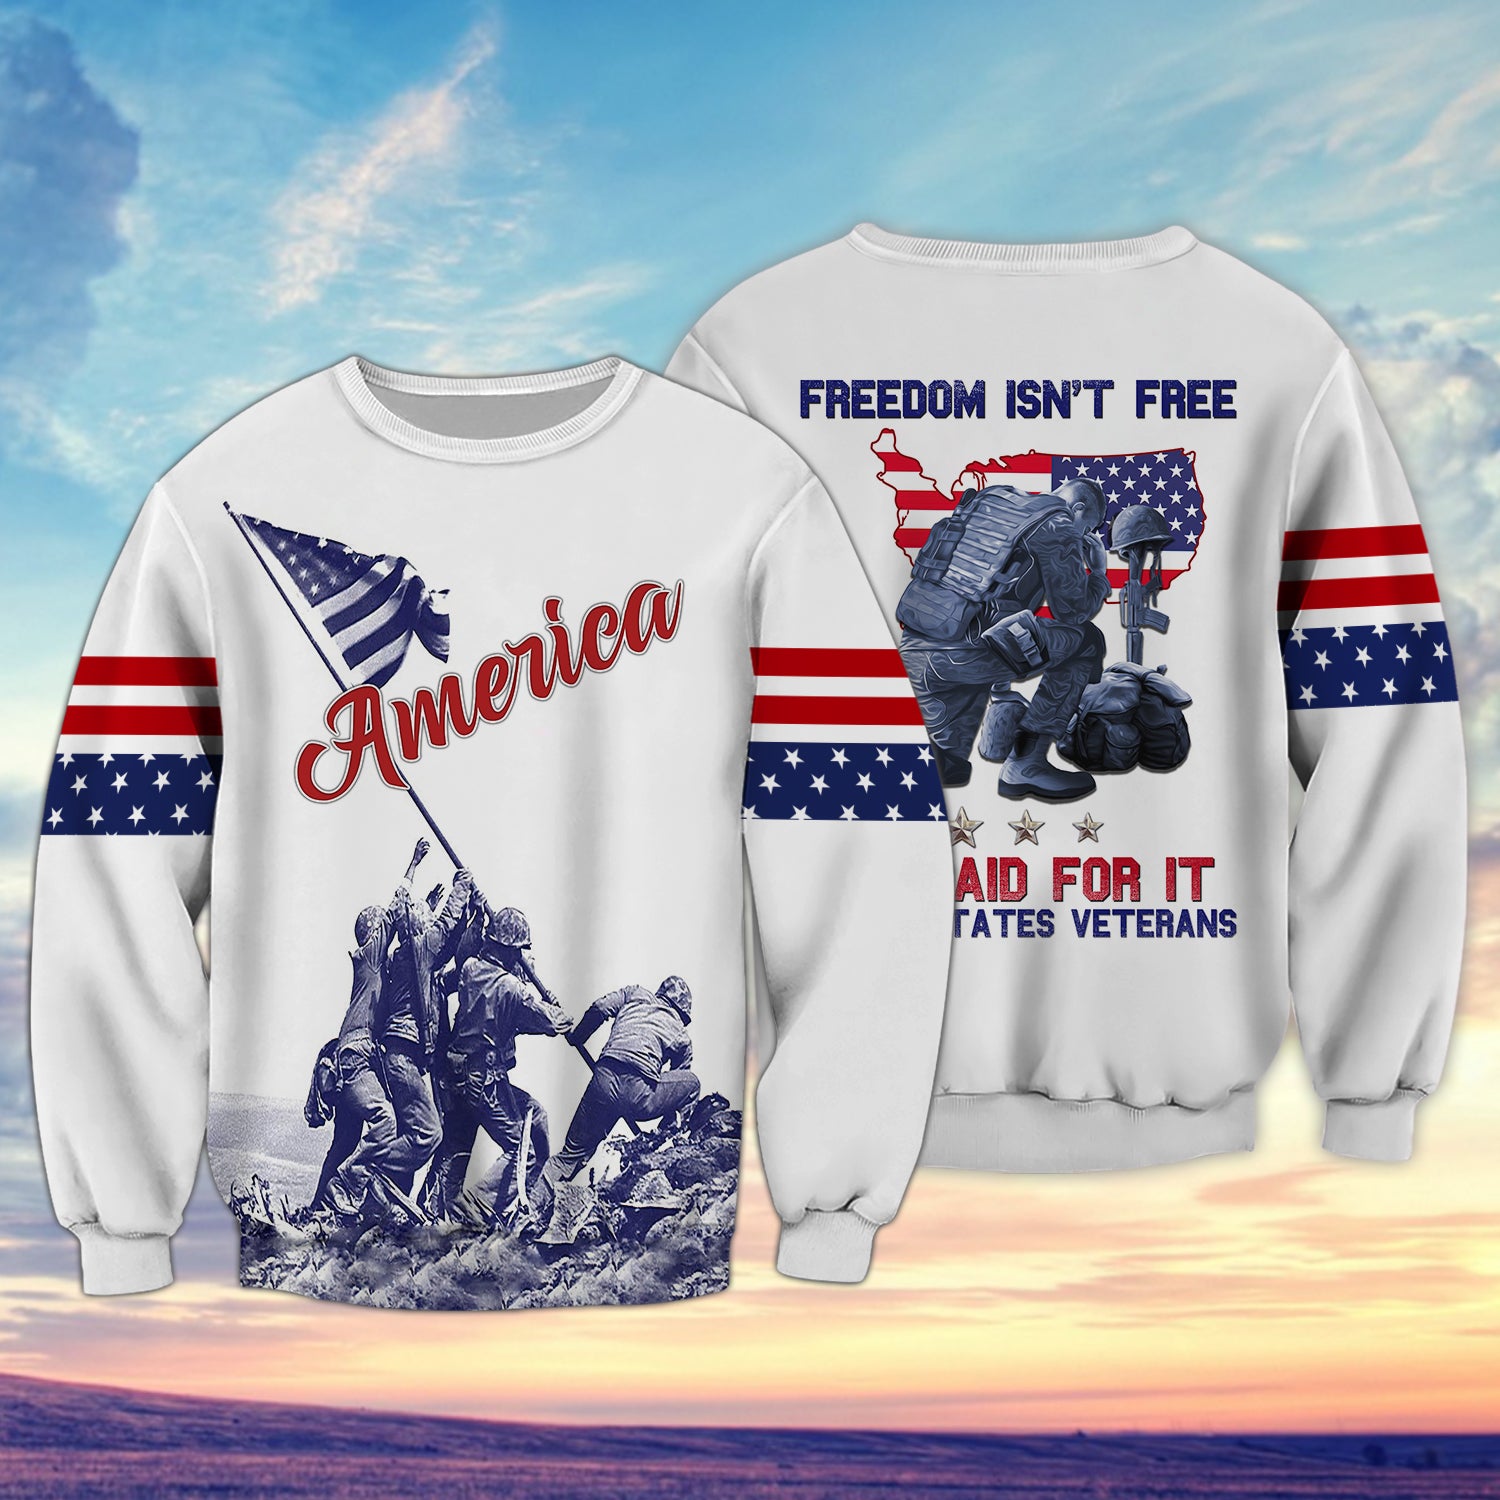 Freedom Isn't Free We Paid For It United States Veteran 3D Full Print Tad 521